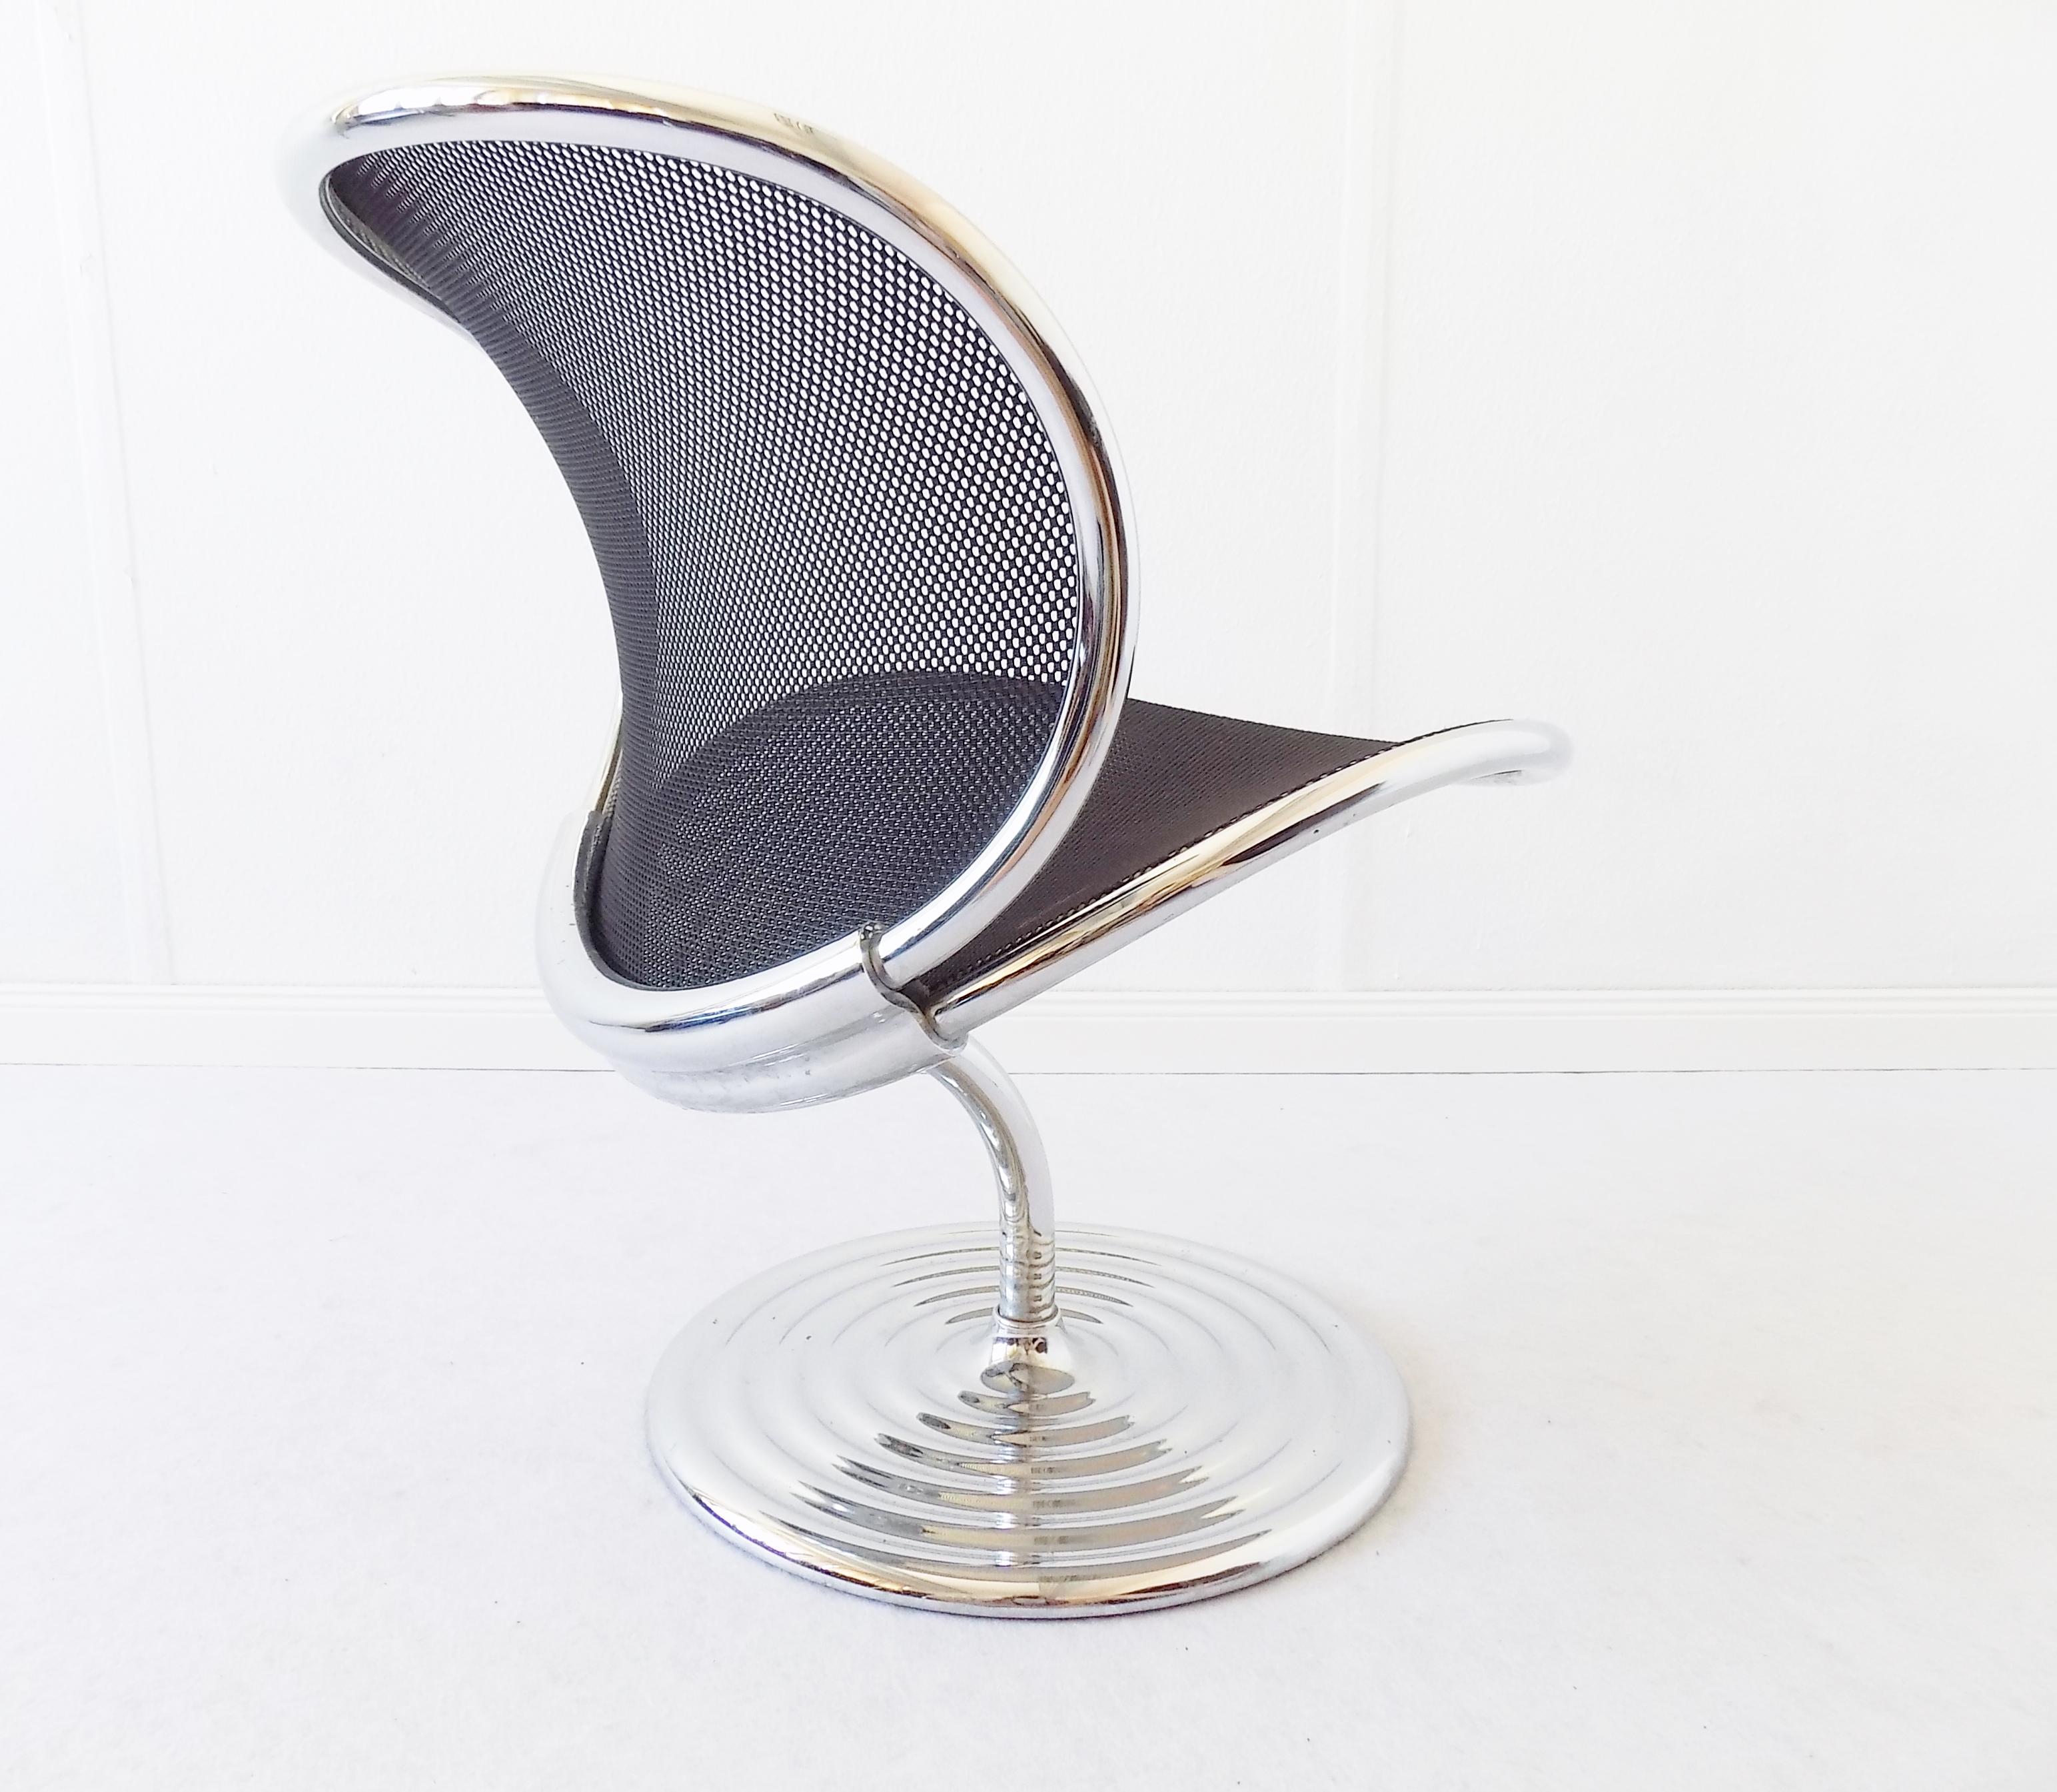 Wilkhahn O Line Lounge Chair by Herbert Ohl, German Design, swivel, contemporary In Good Condition For Sale In Ludwigslust, Mecklenburg-Vorpommern